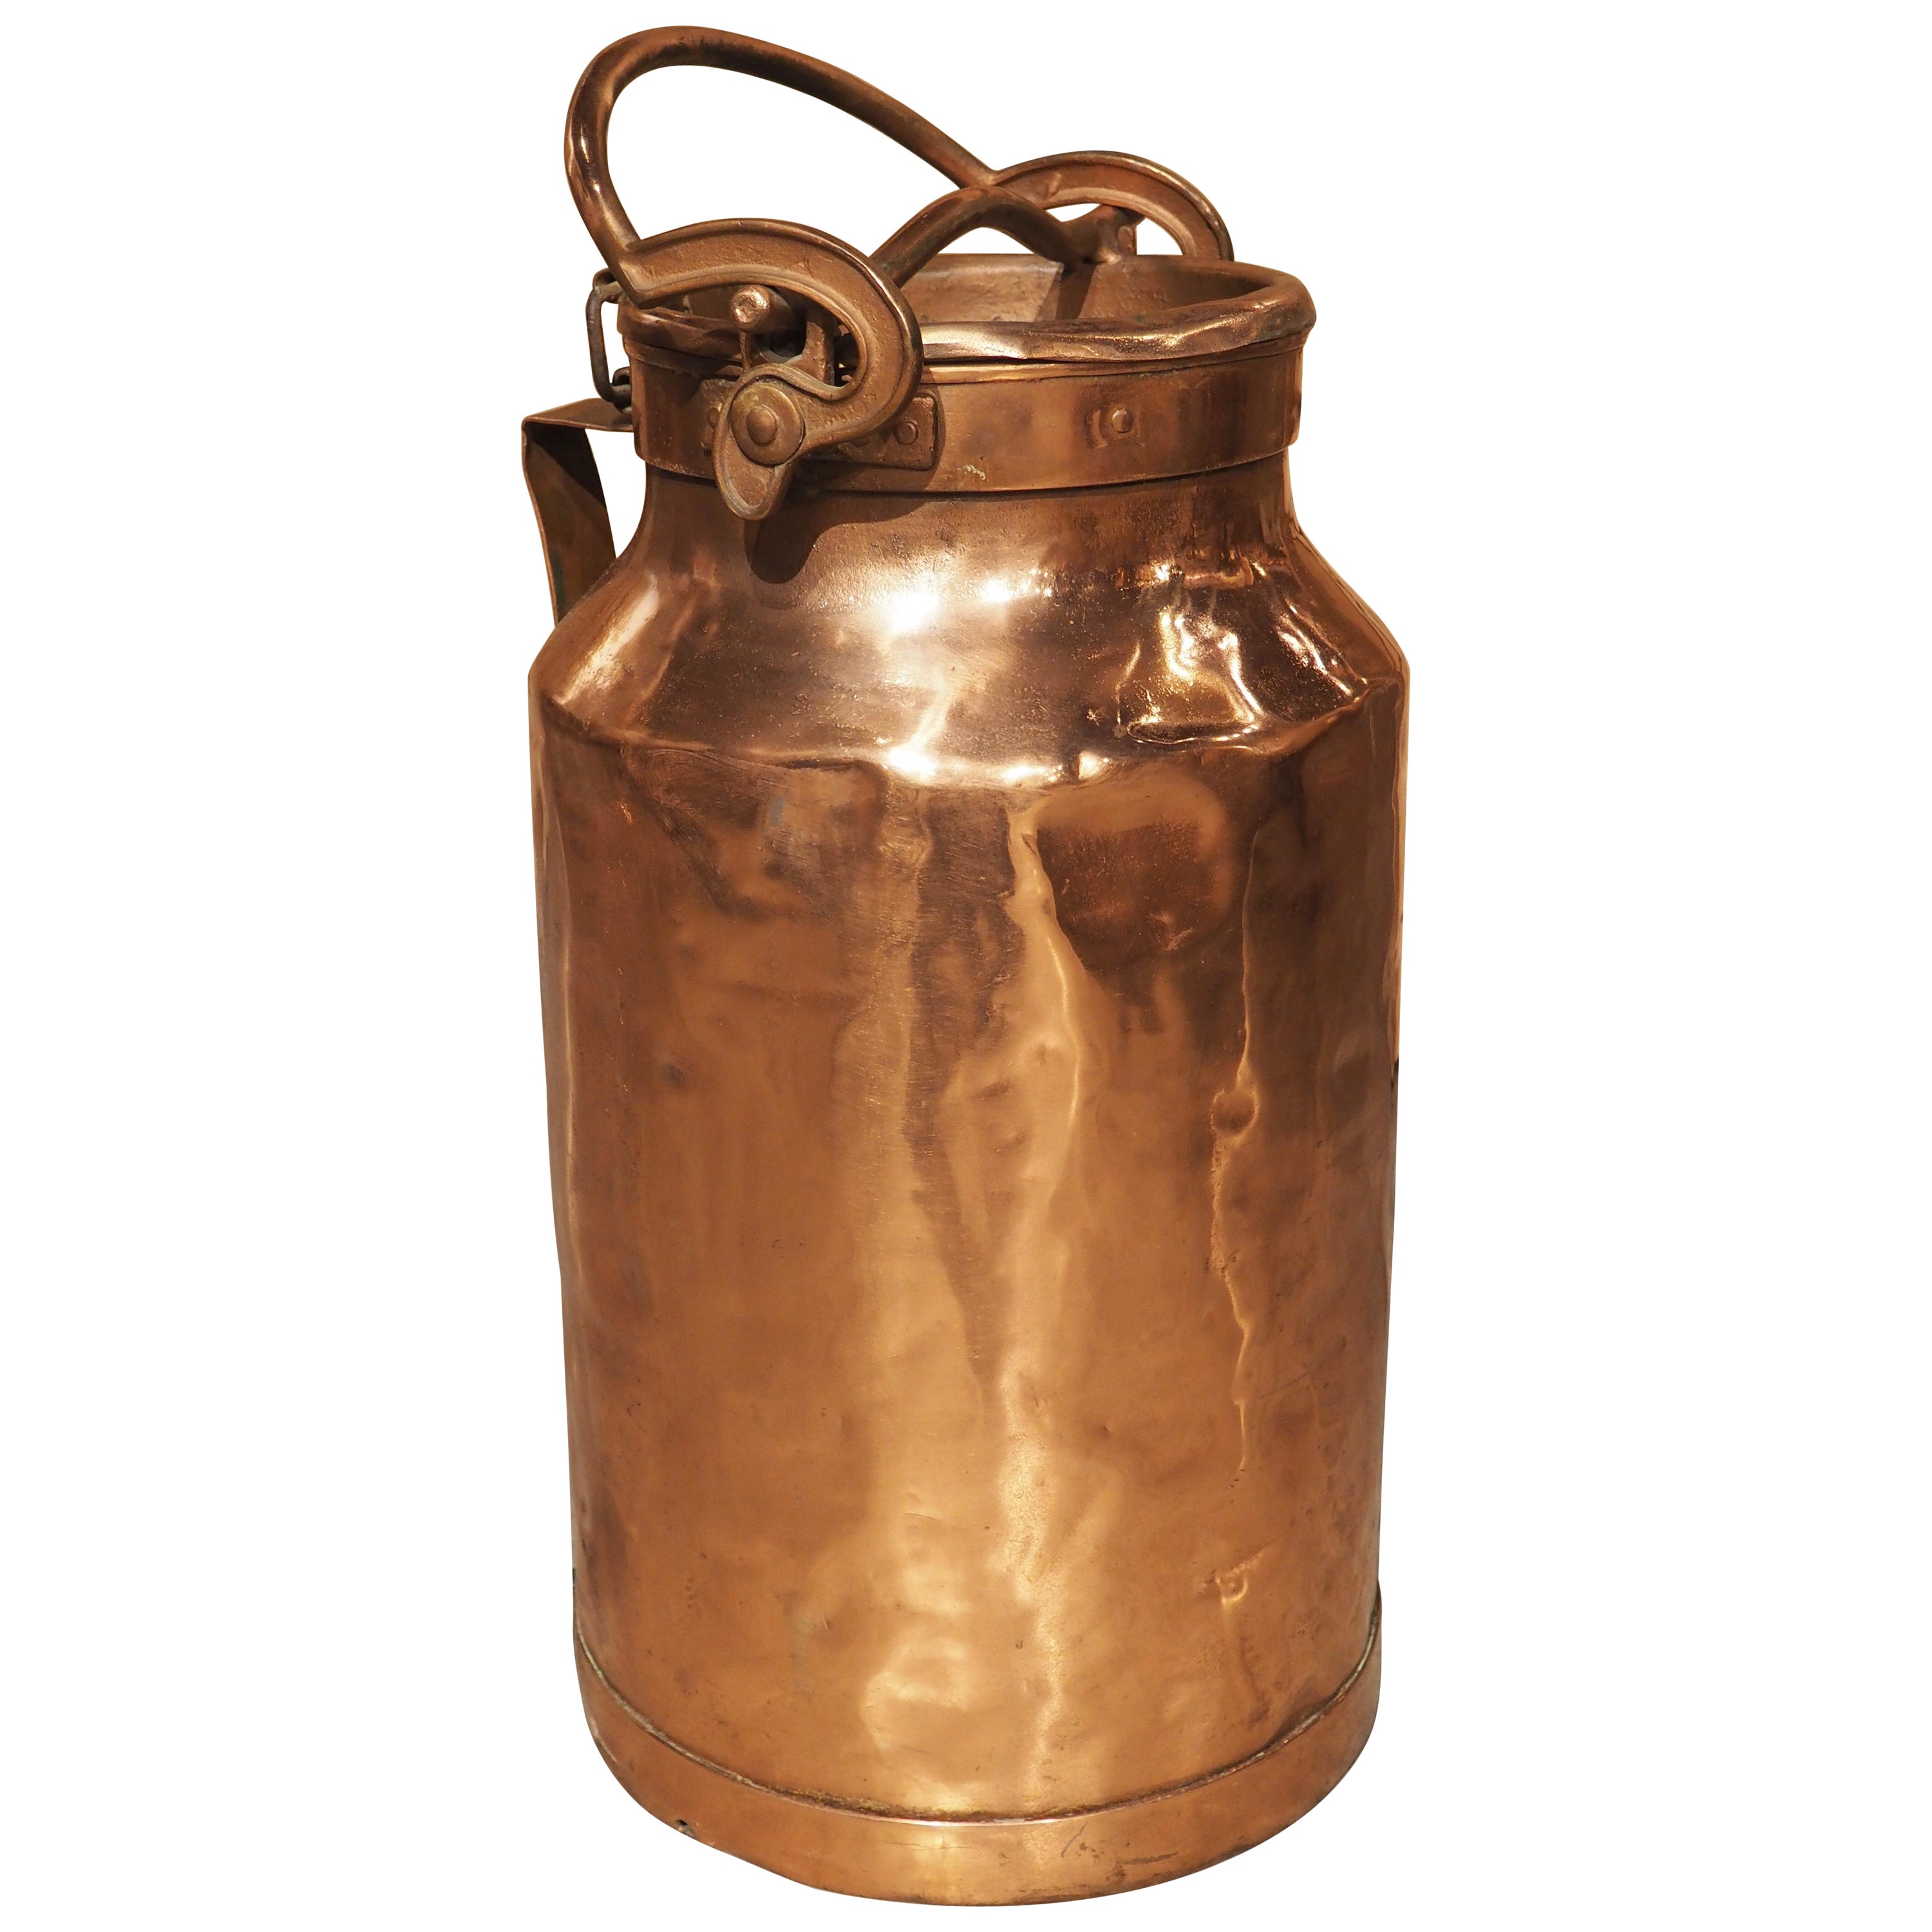 Antique French Polished Copper Milk Container, circa 1890